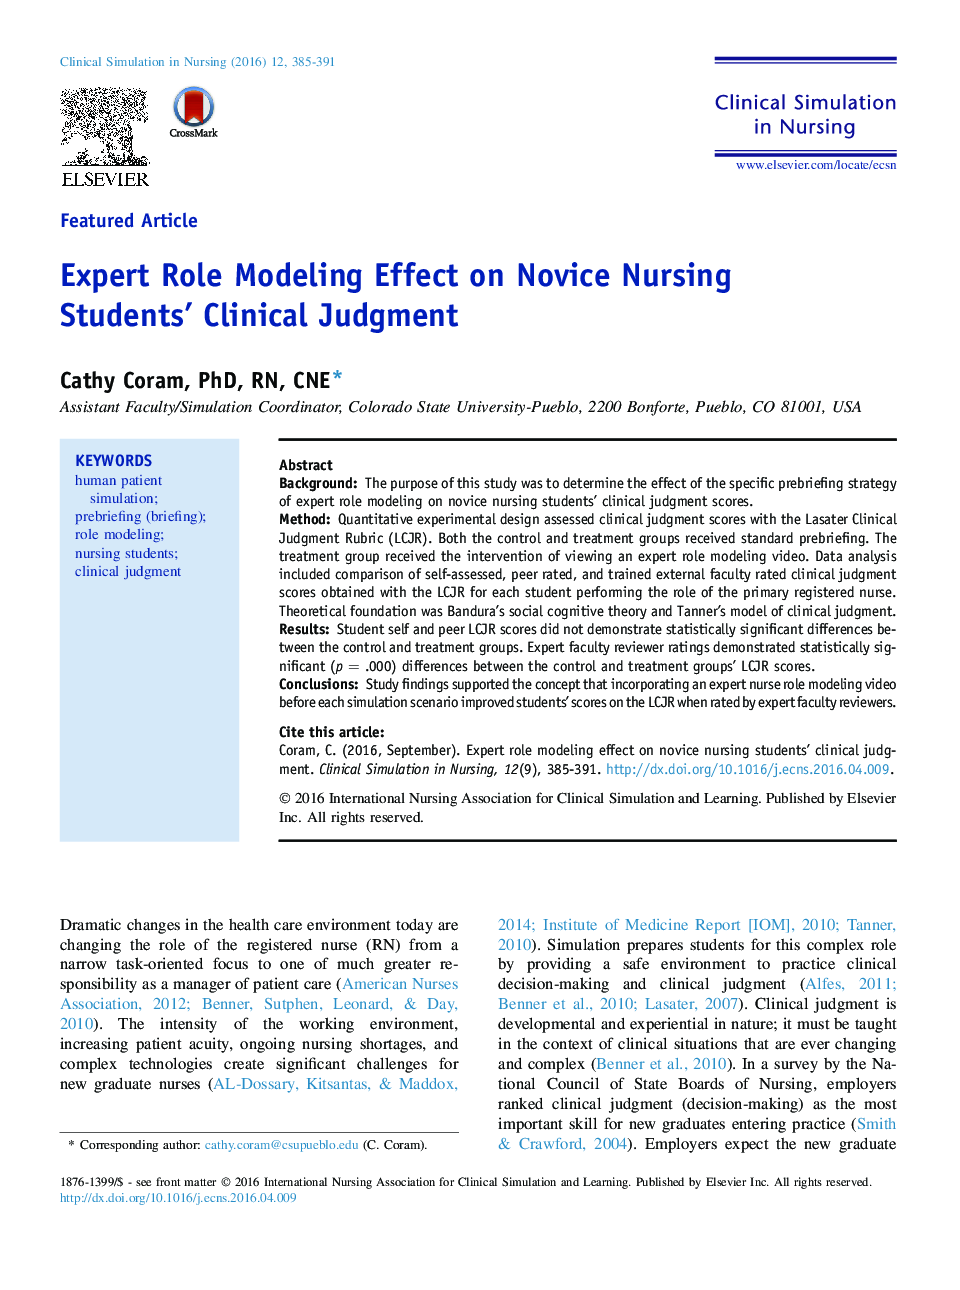 Expert Role Modeling Effect on Novice Nursing Students' Clinical Judgment